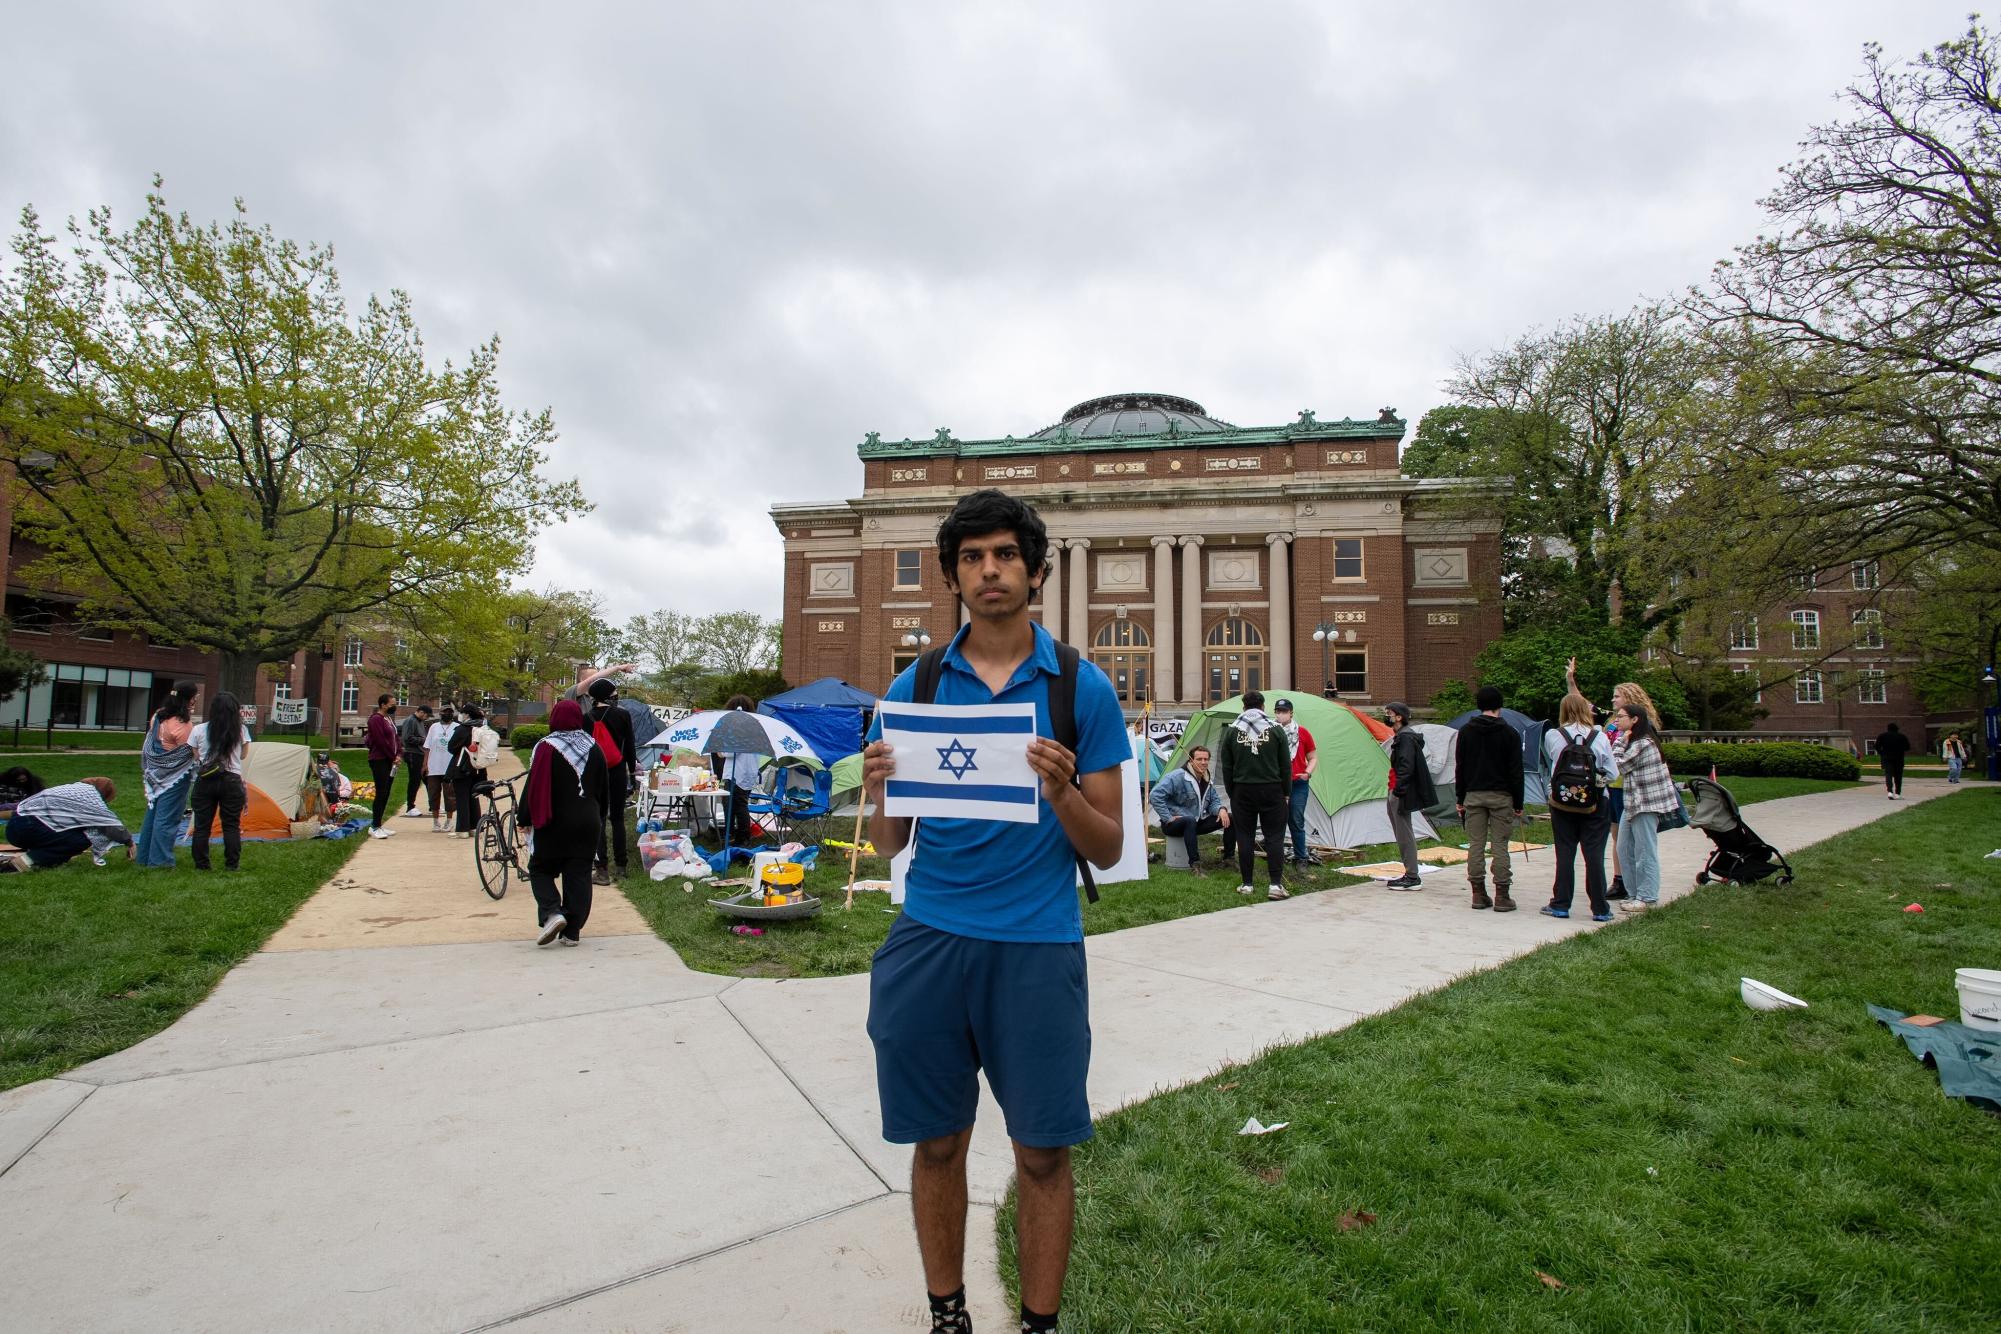 A student, Sean, who requested to be identified by first name only, stands with a printed photo of a flag of Israel in front of the encampment.